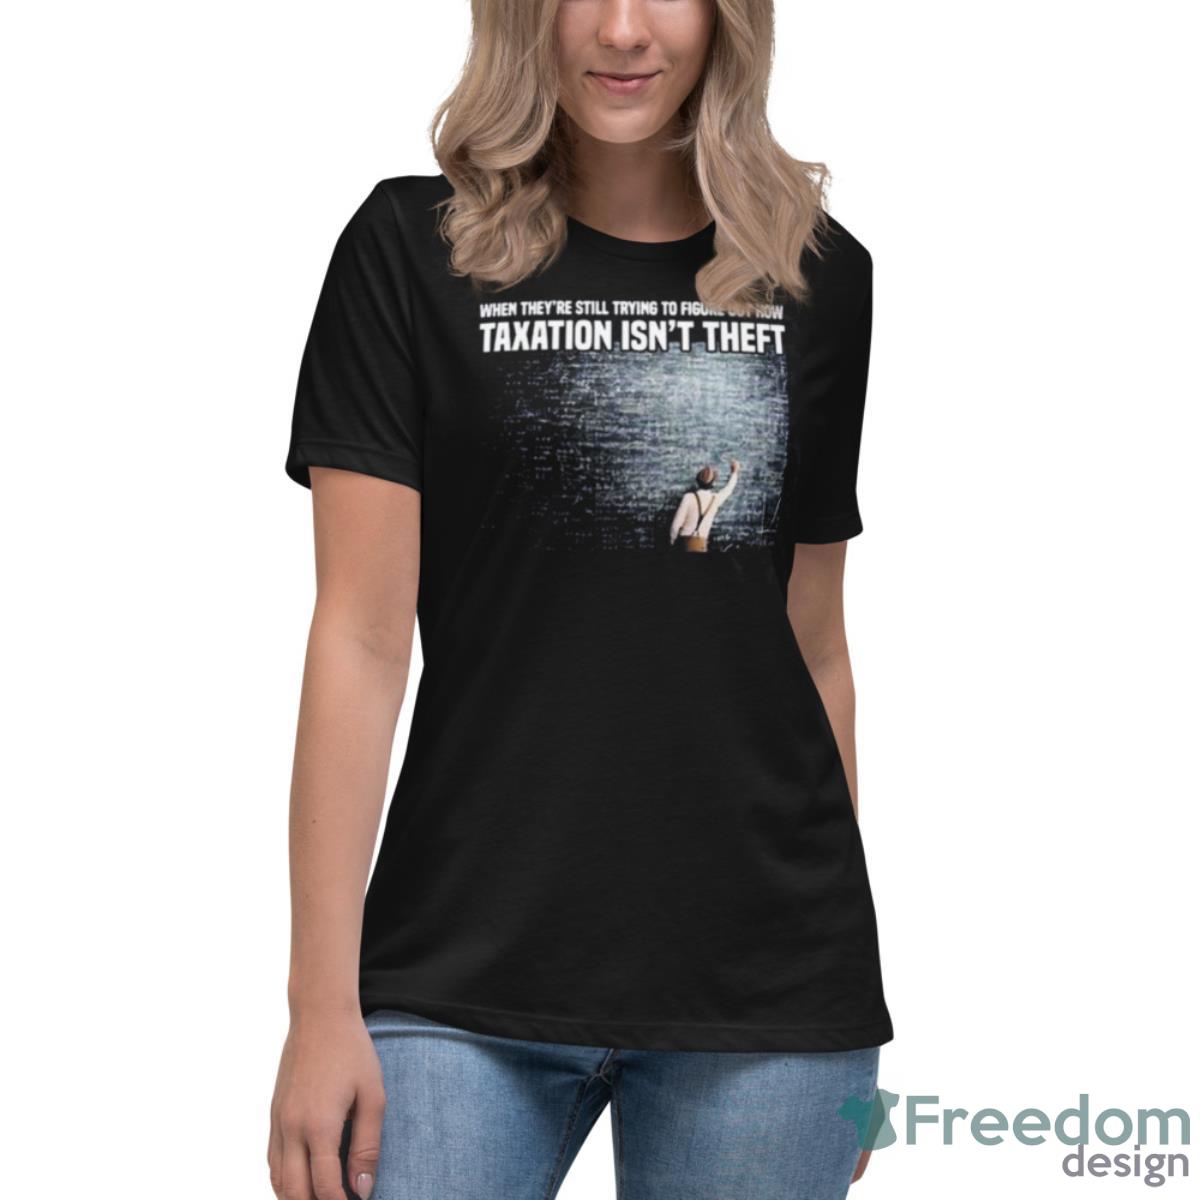 Taxation Is Not Theft Equation Shirt